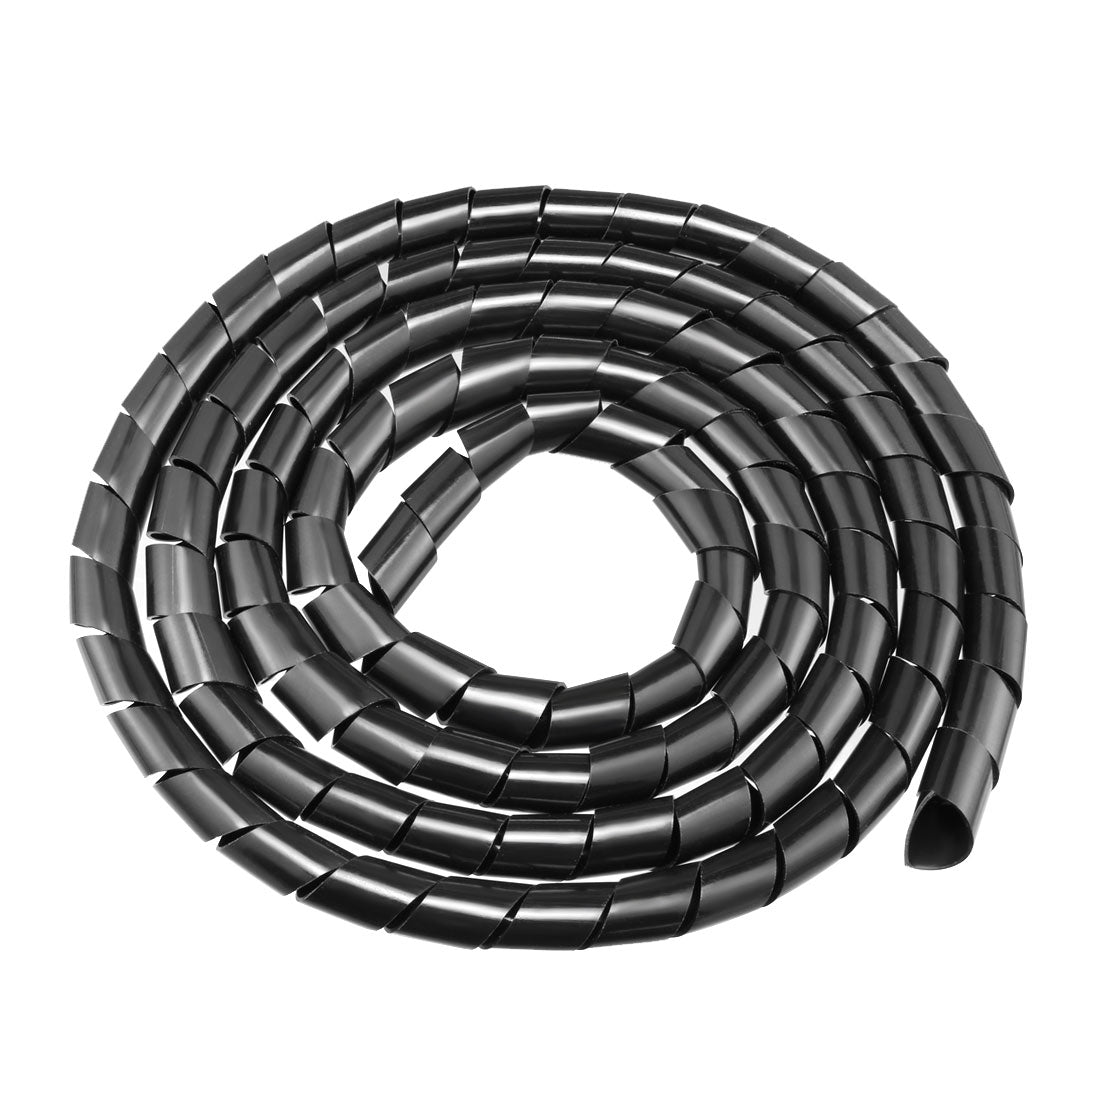 uxcell Uxcell 20mm Flexible Spiral Tube Cable Wire Wrap Computer Manage Cord Black 2.8M